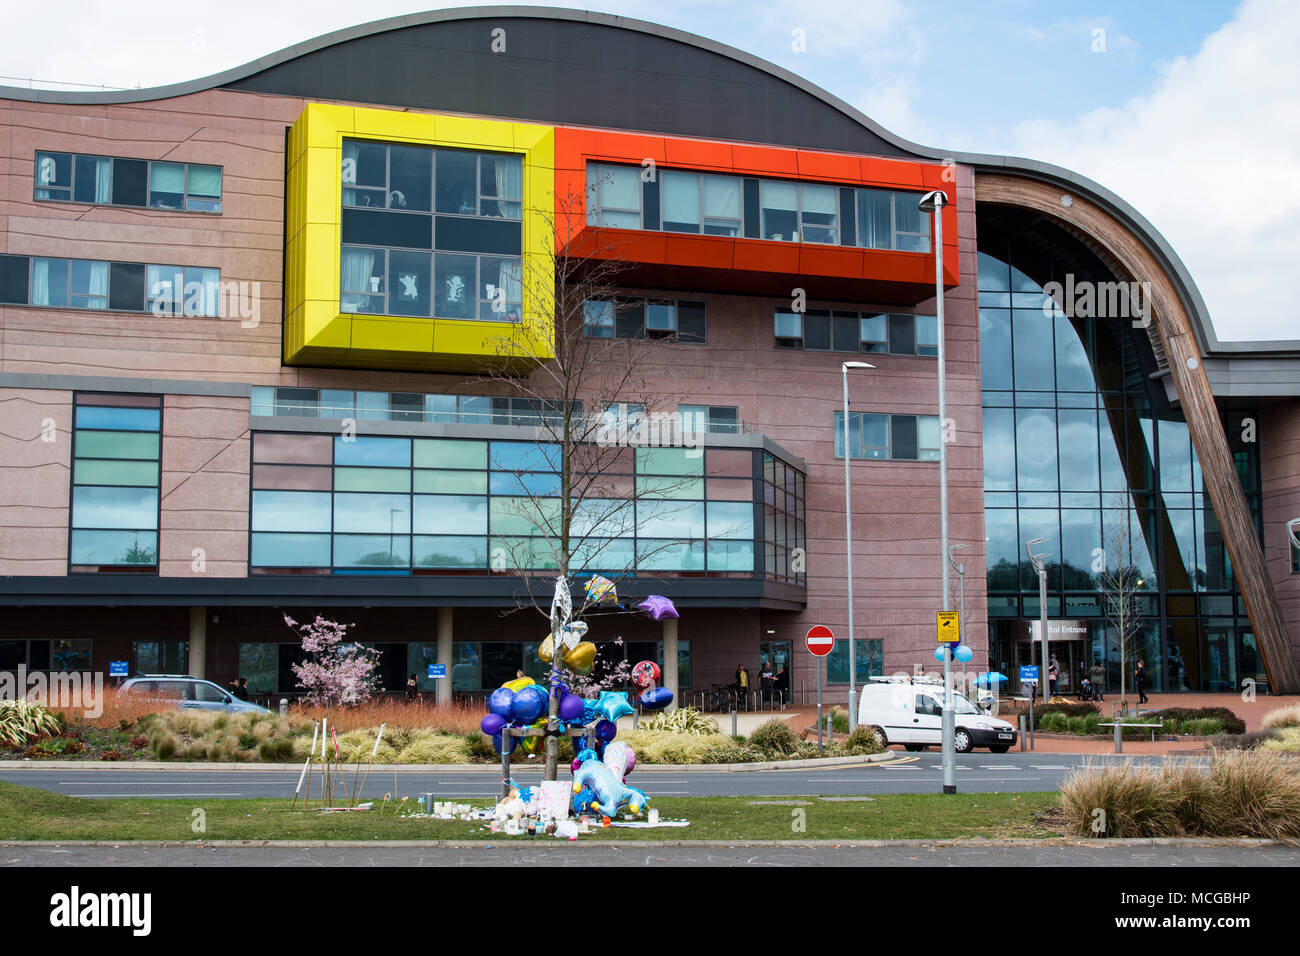 Alder Hey, Liverpool, UK. 18th. April 2018: People protesting outside Alder Hey Hospital in Knotty Ash area of Liverpool in support of toddler Alfie Evans who is currently on a life support system which the hospital specialists plan to remove, allowing Alfie to die. Alfies parents await the courts decision allowing them to transfer Alfie to a hospital in Italy where specialists state they may be able to offer help with his medical condition. A medical team and private jet have been offered to the parents to transport Alfie to Italy. Credit: Dave Ellison/Alamy Live News Stock Photo